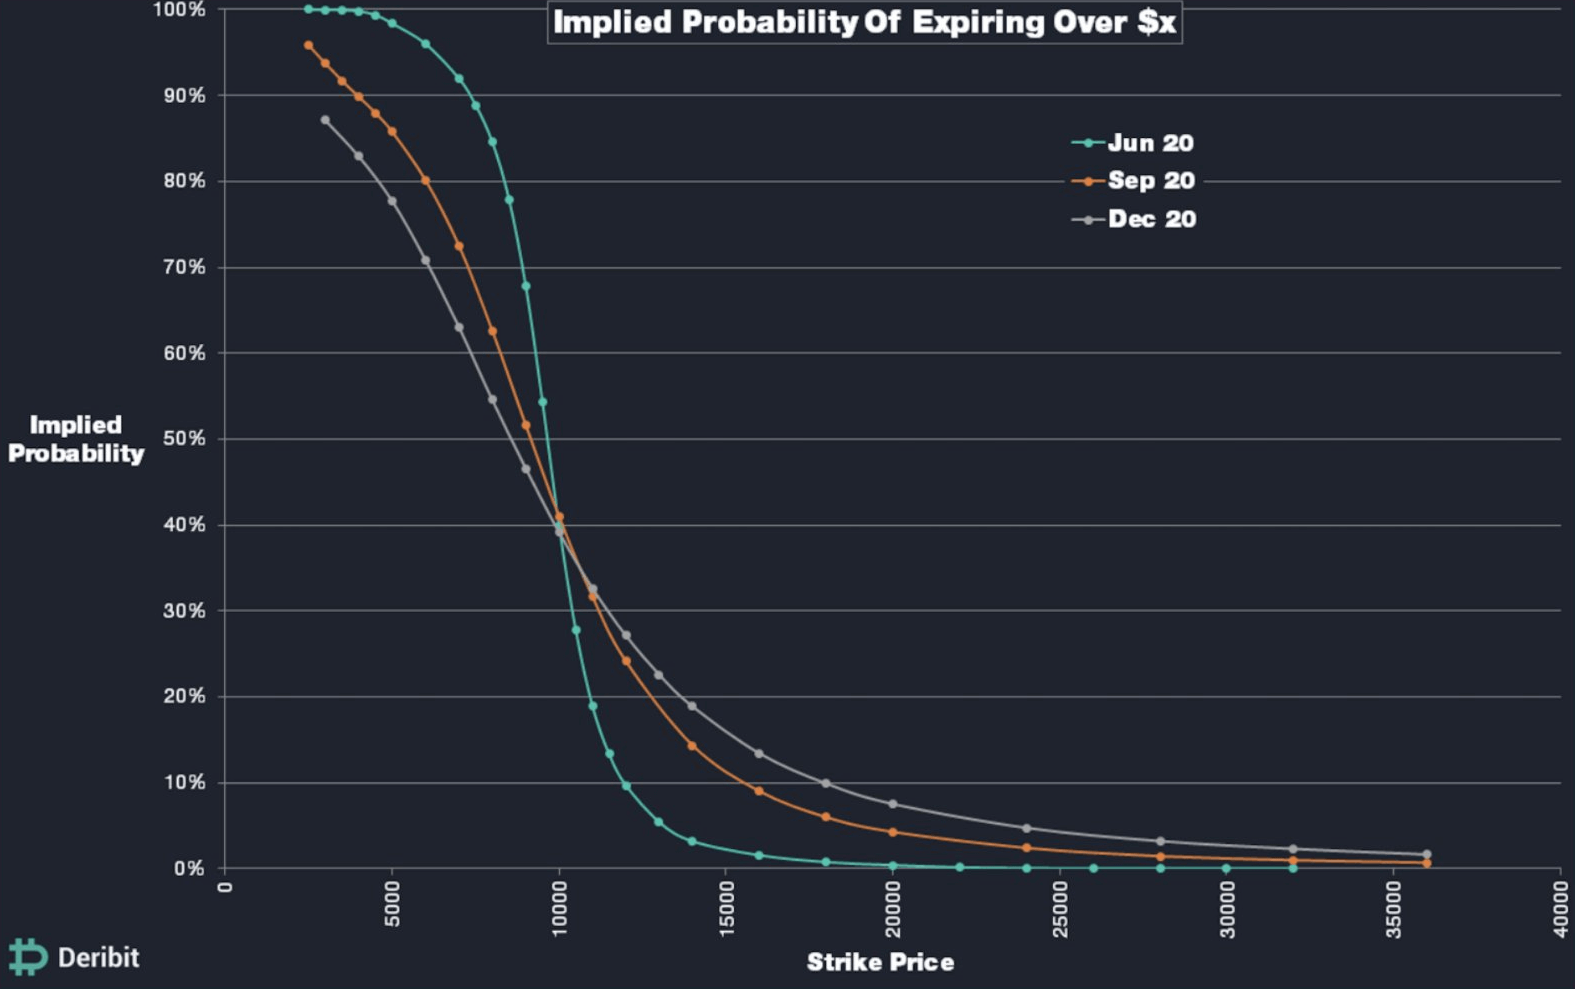 Implied Probability of Expiring Over Sx